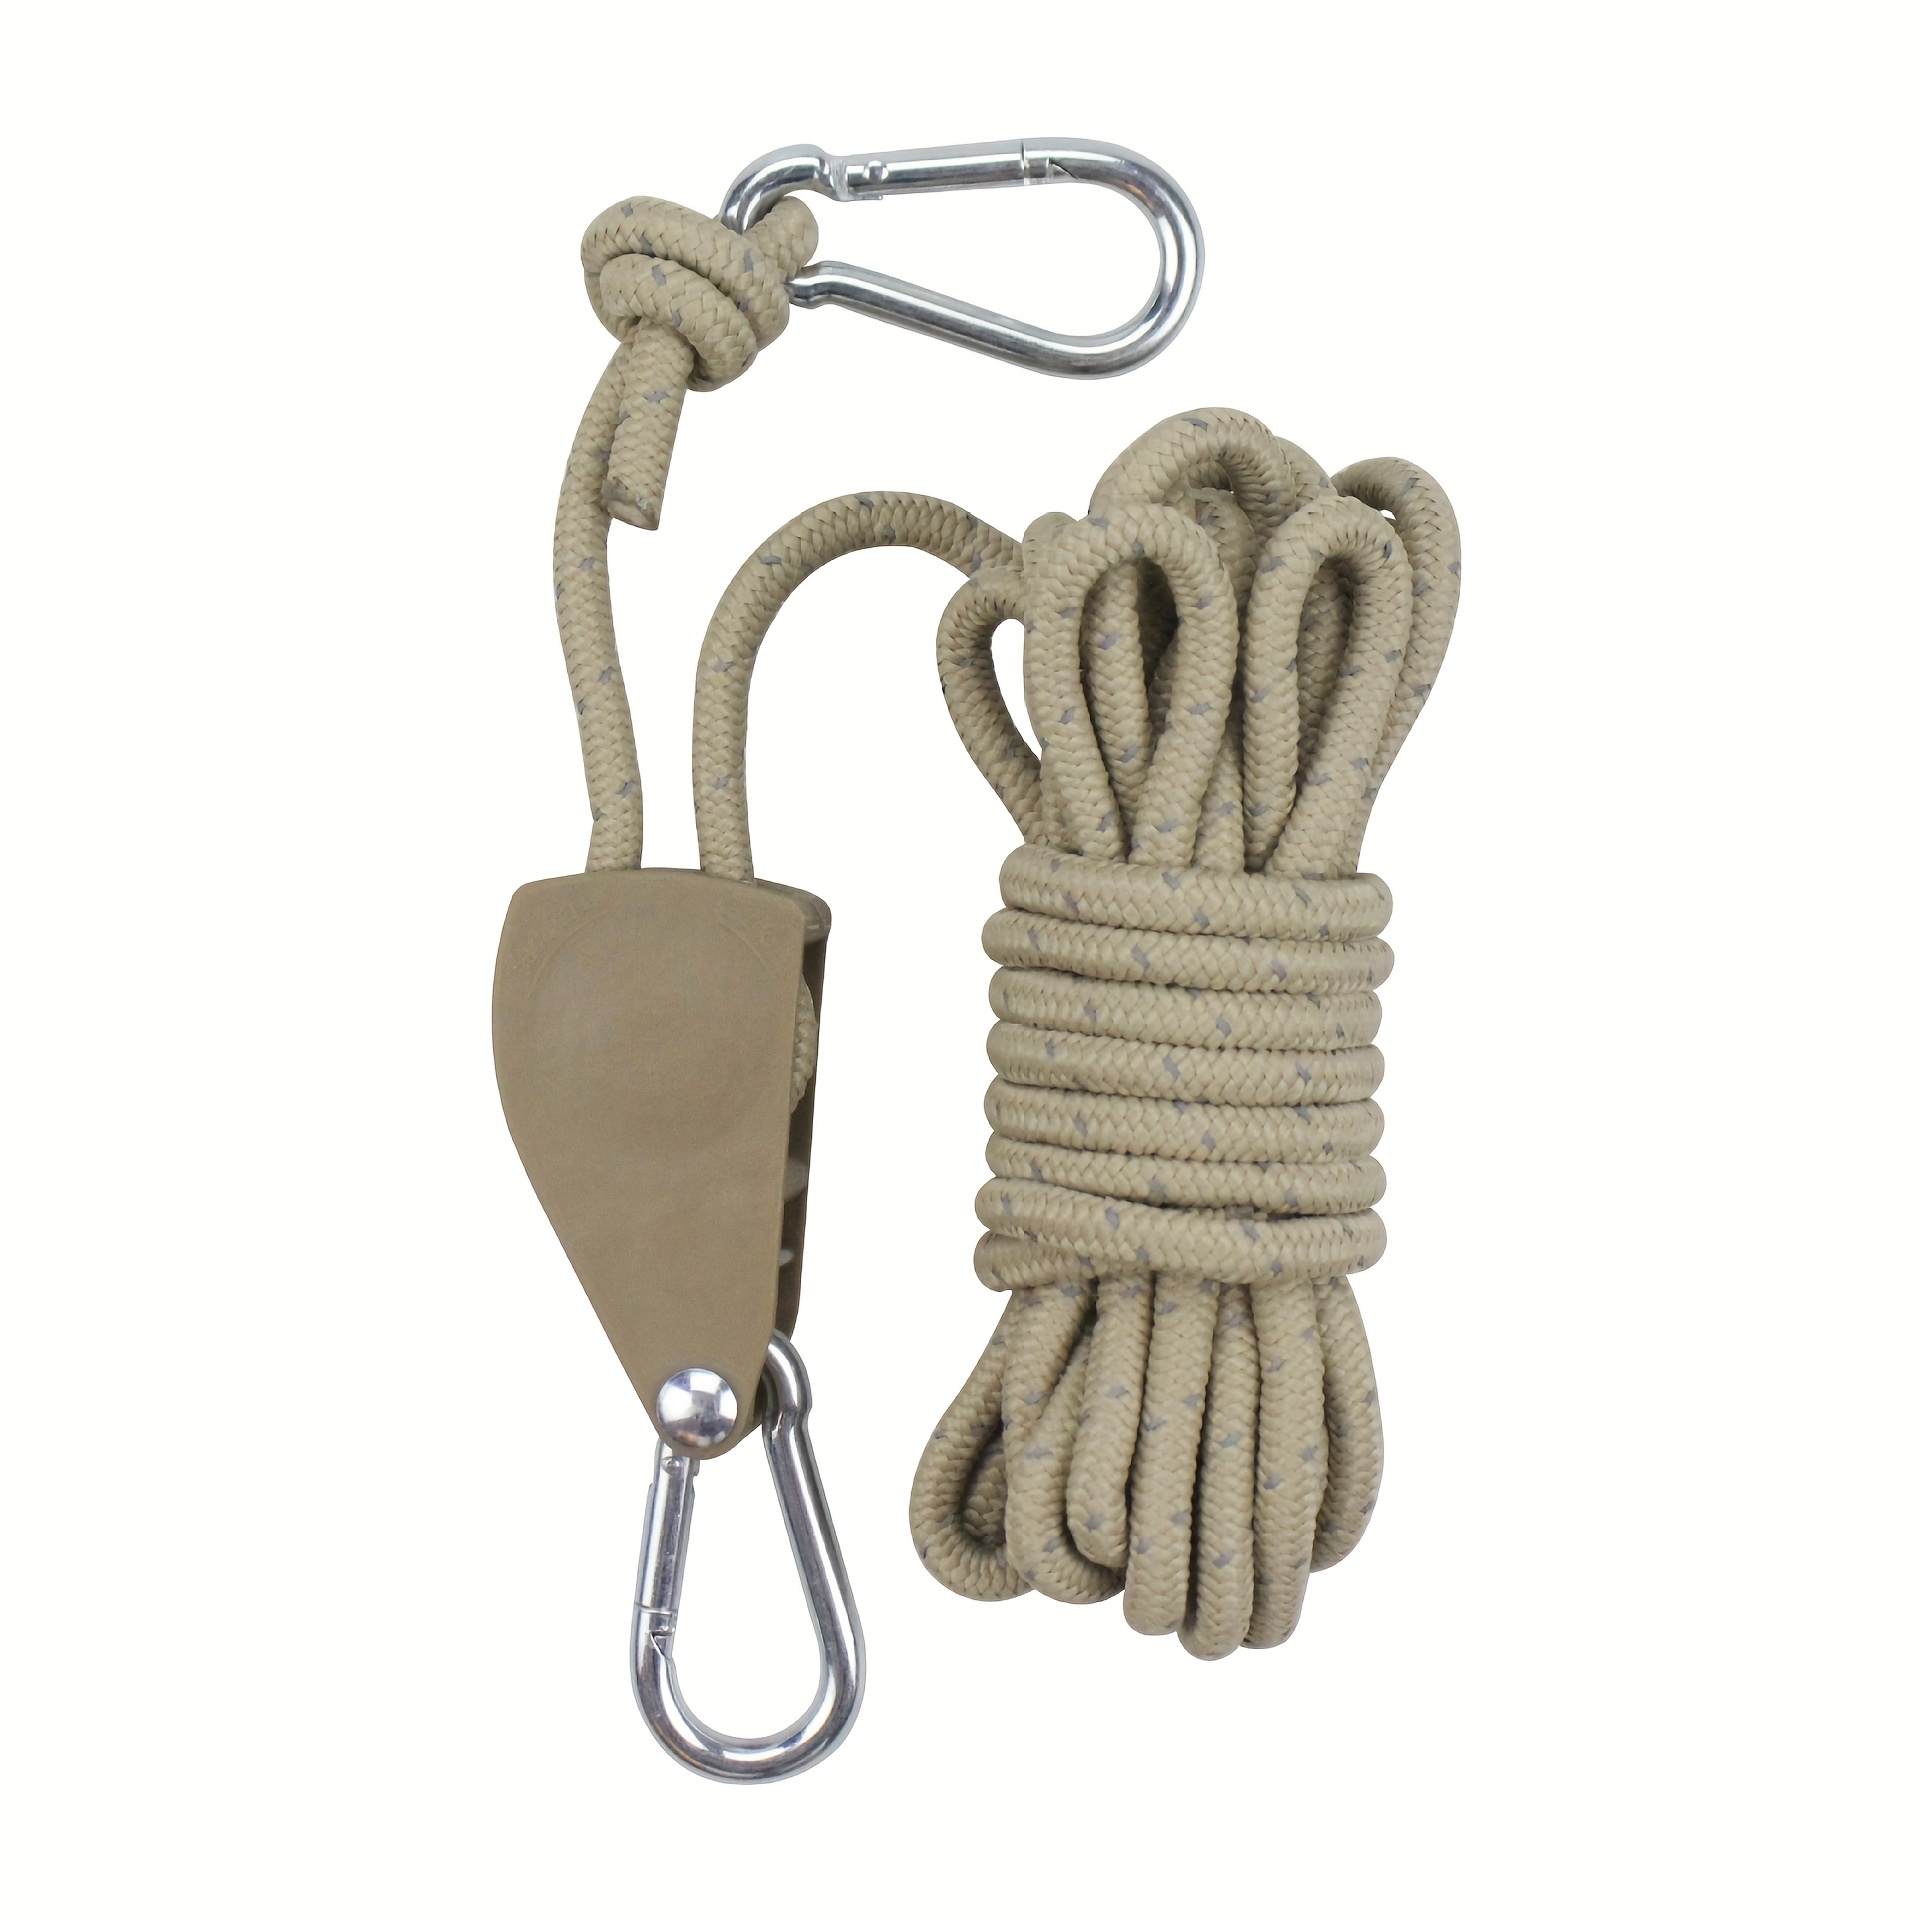 Tent Windproof Rope Pulley Adjuster Fixed Canopy Waterproof Rope